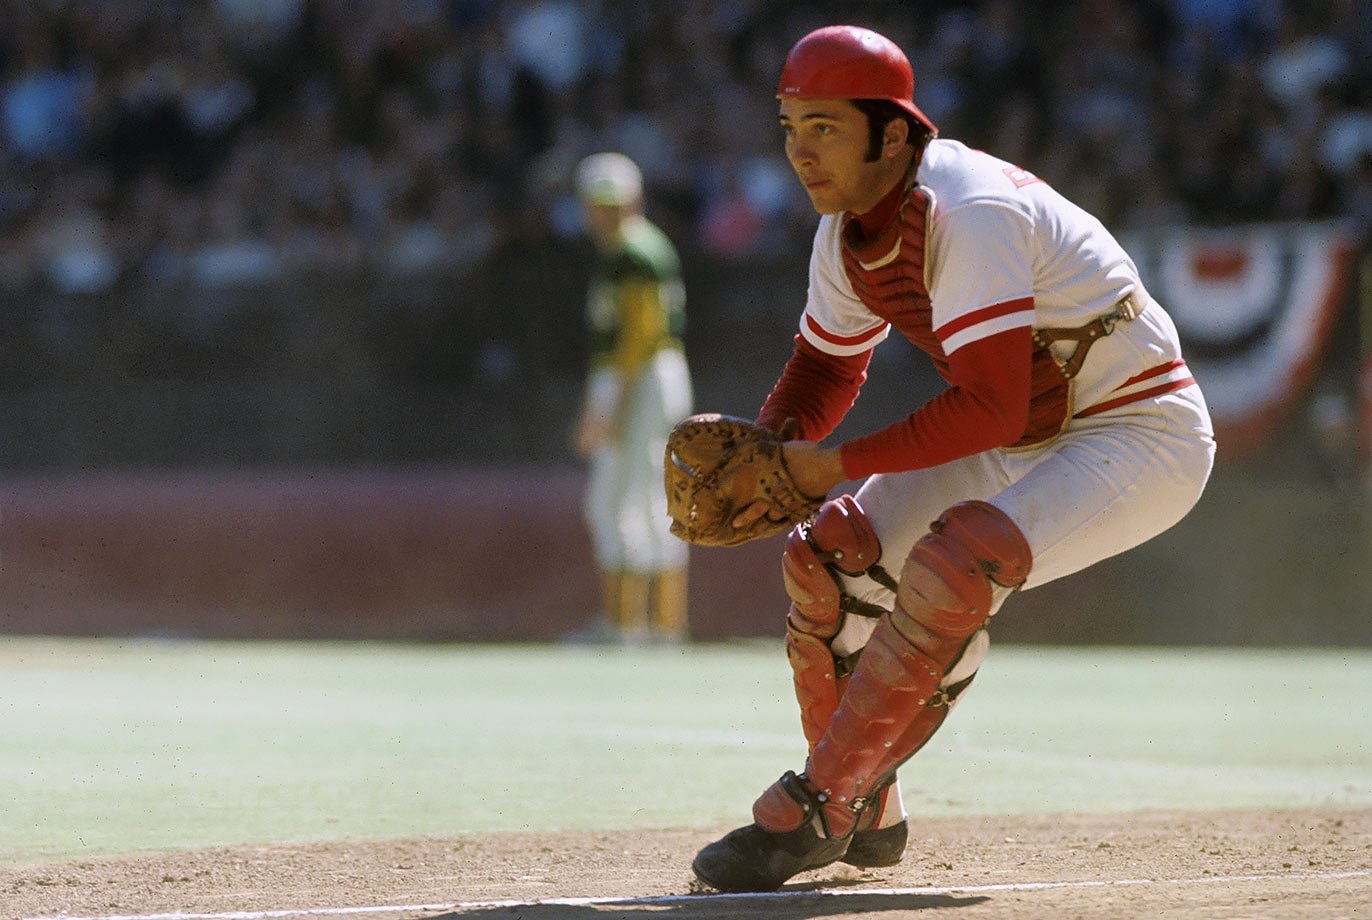 The Five best catchers in Reds history, Sports